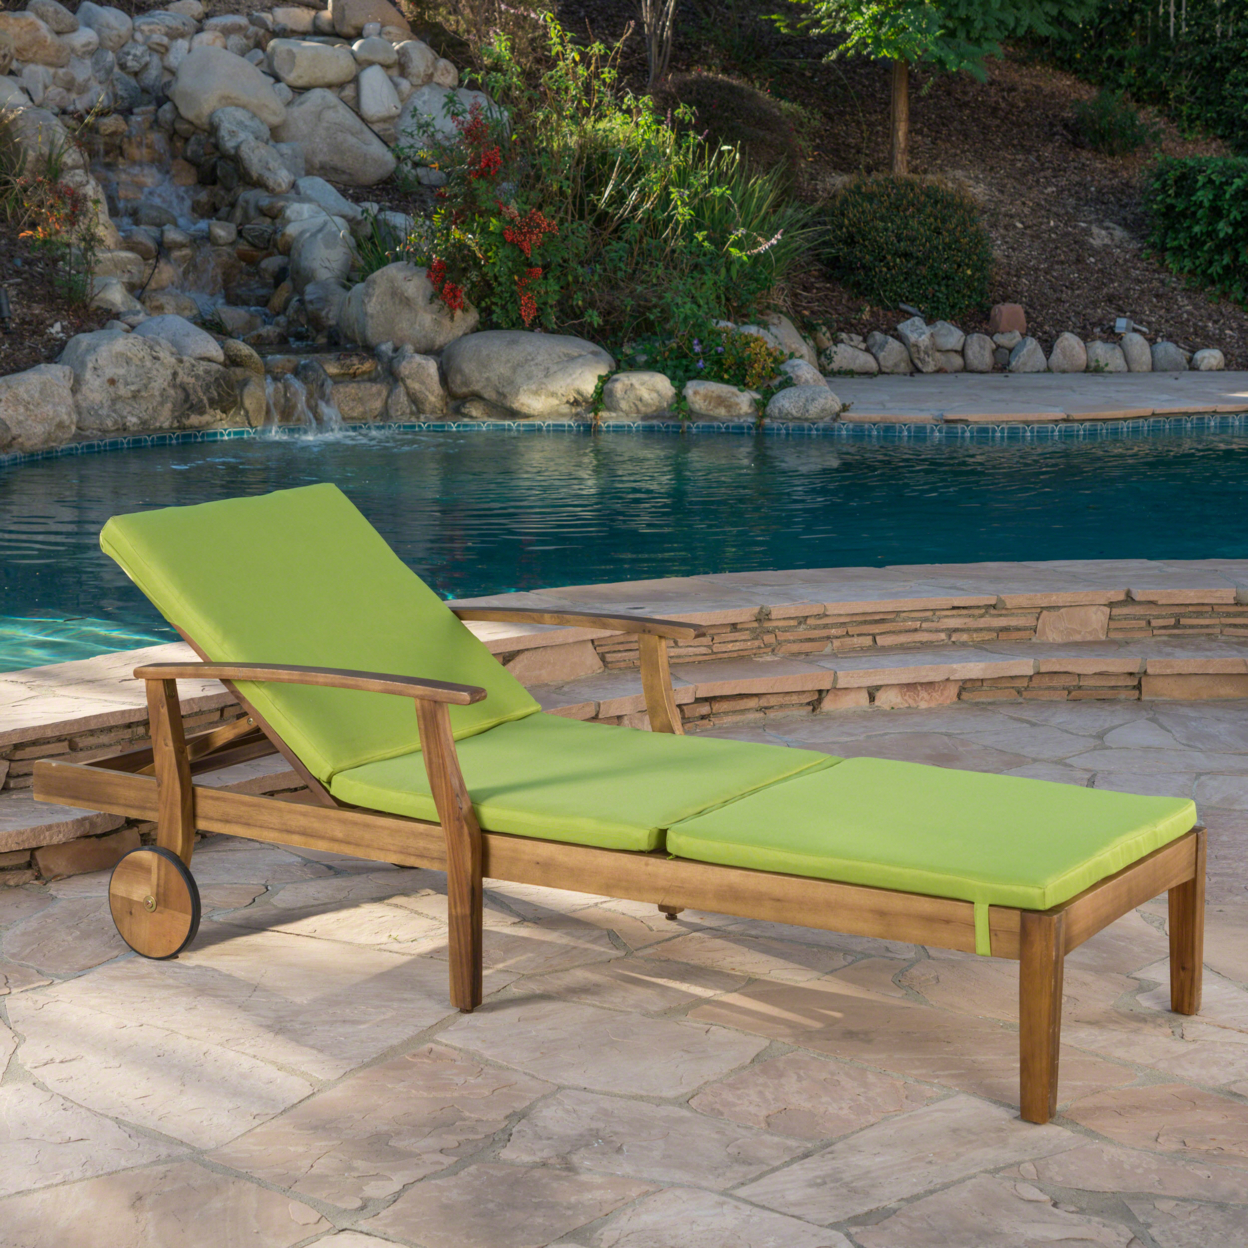 Daisy Outdoor Teak Finish Chaise Lounge With Water Resistant Cushion - Green, Single